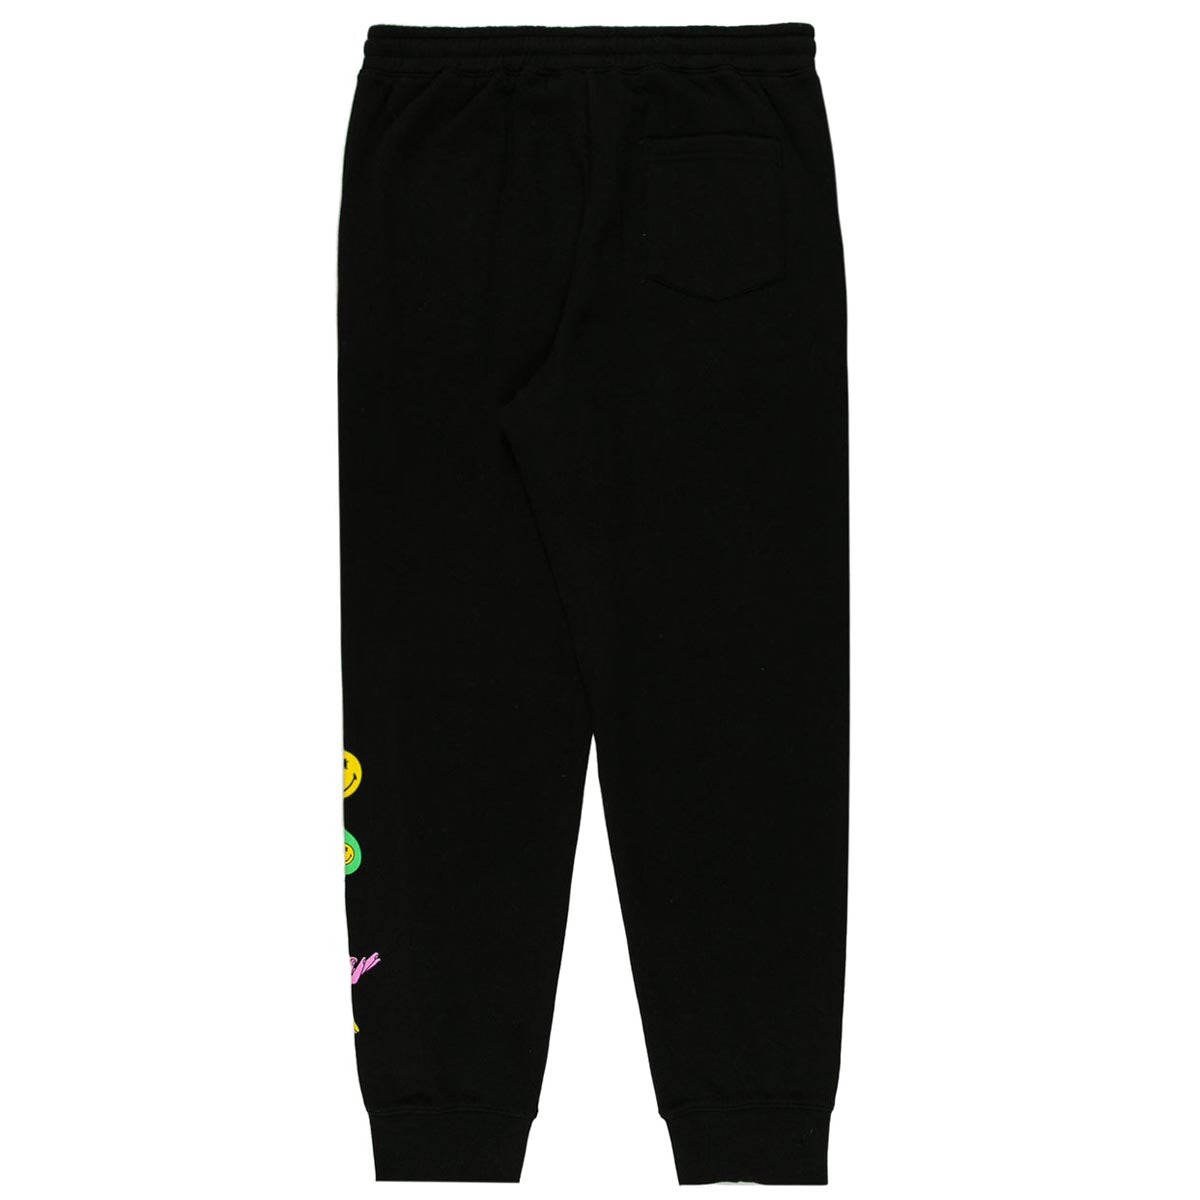 Grizzly x Smiley World Sweat Pants - Black image 3